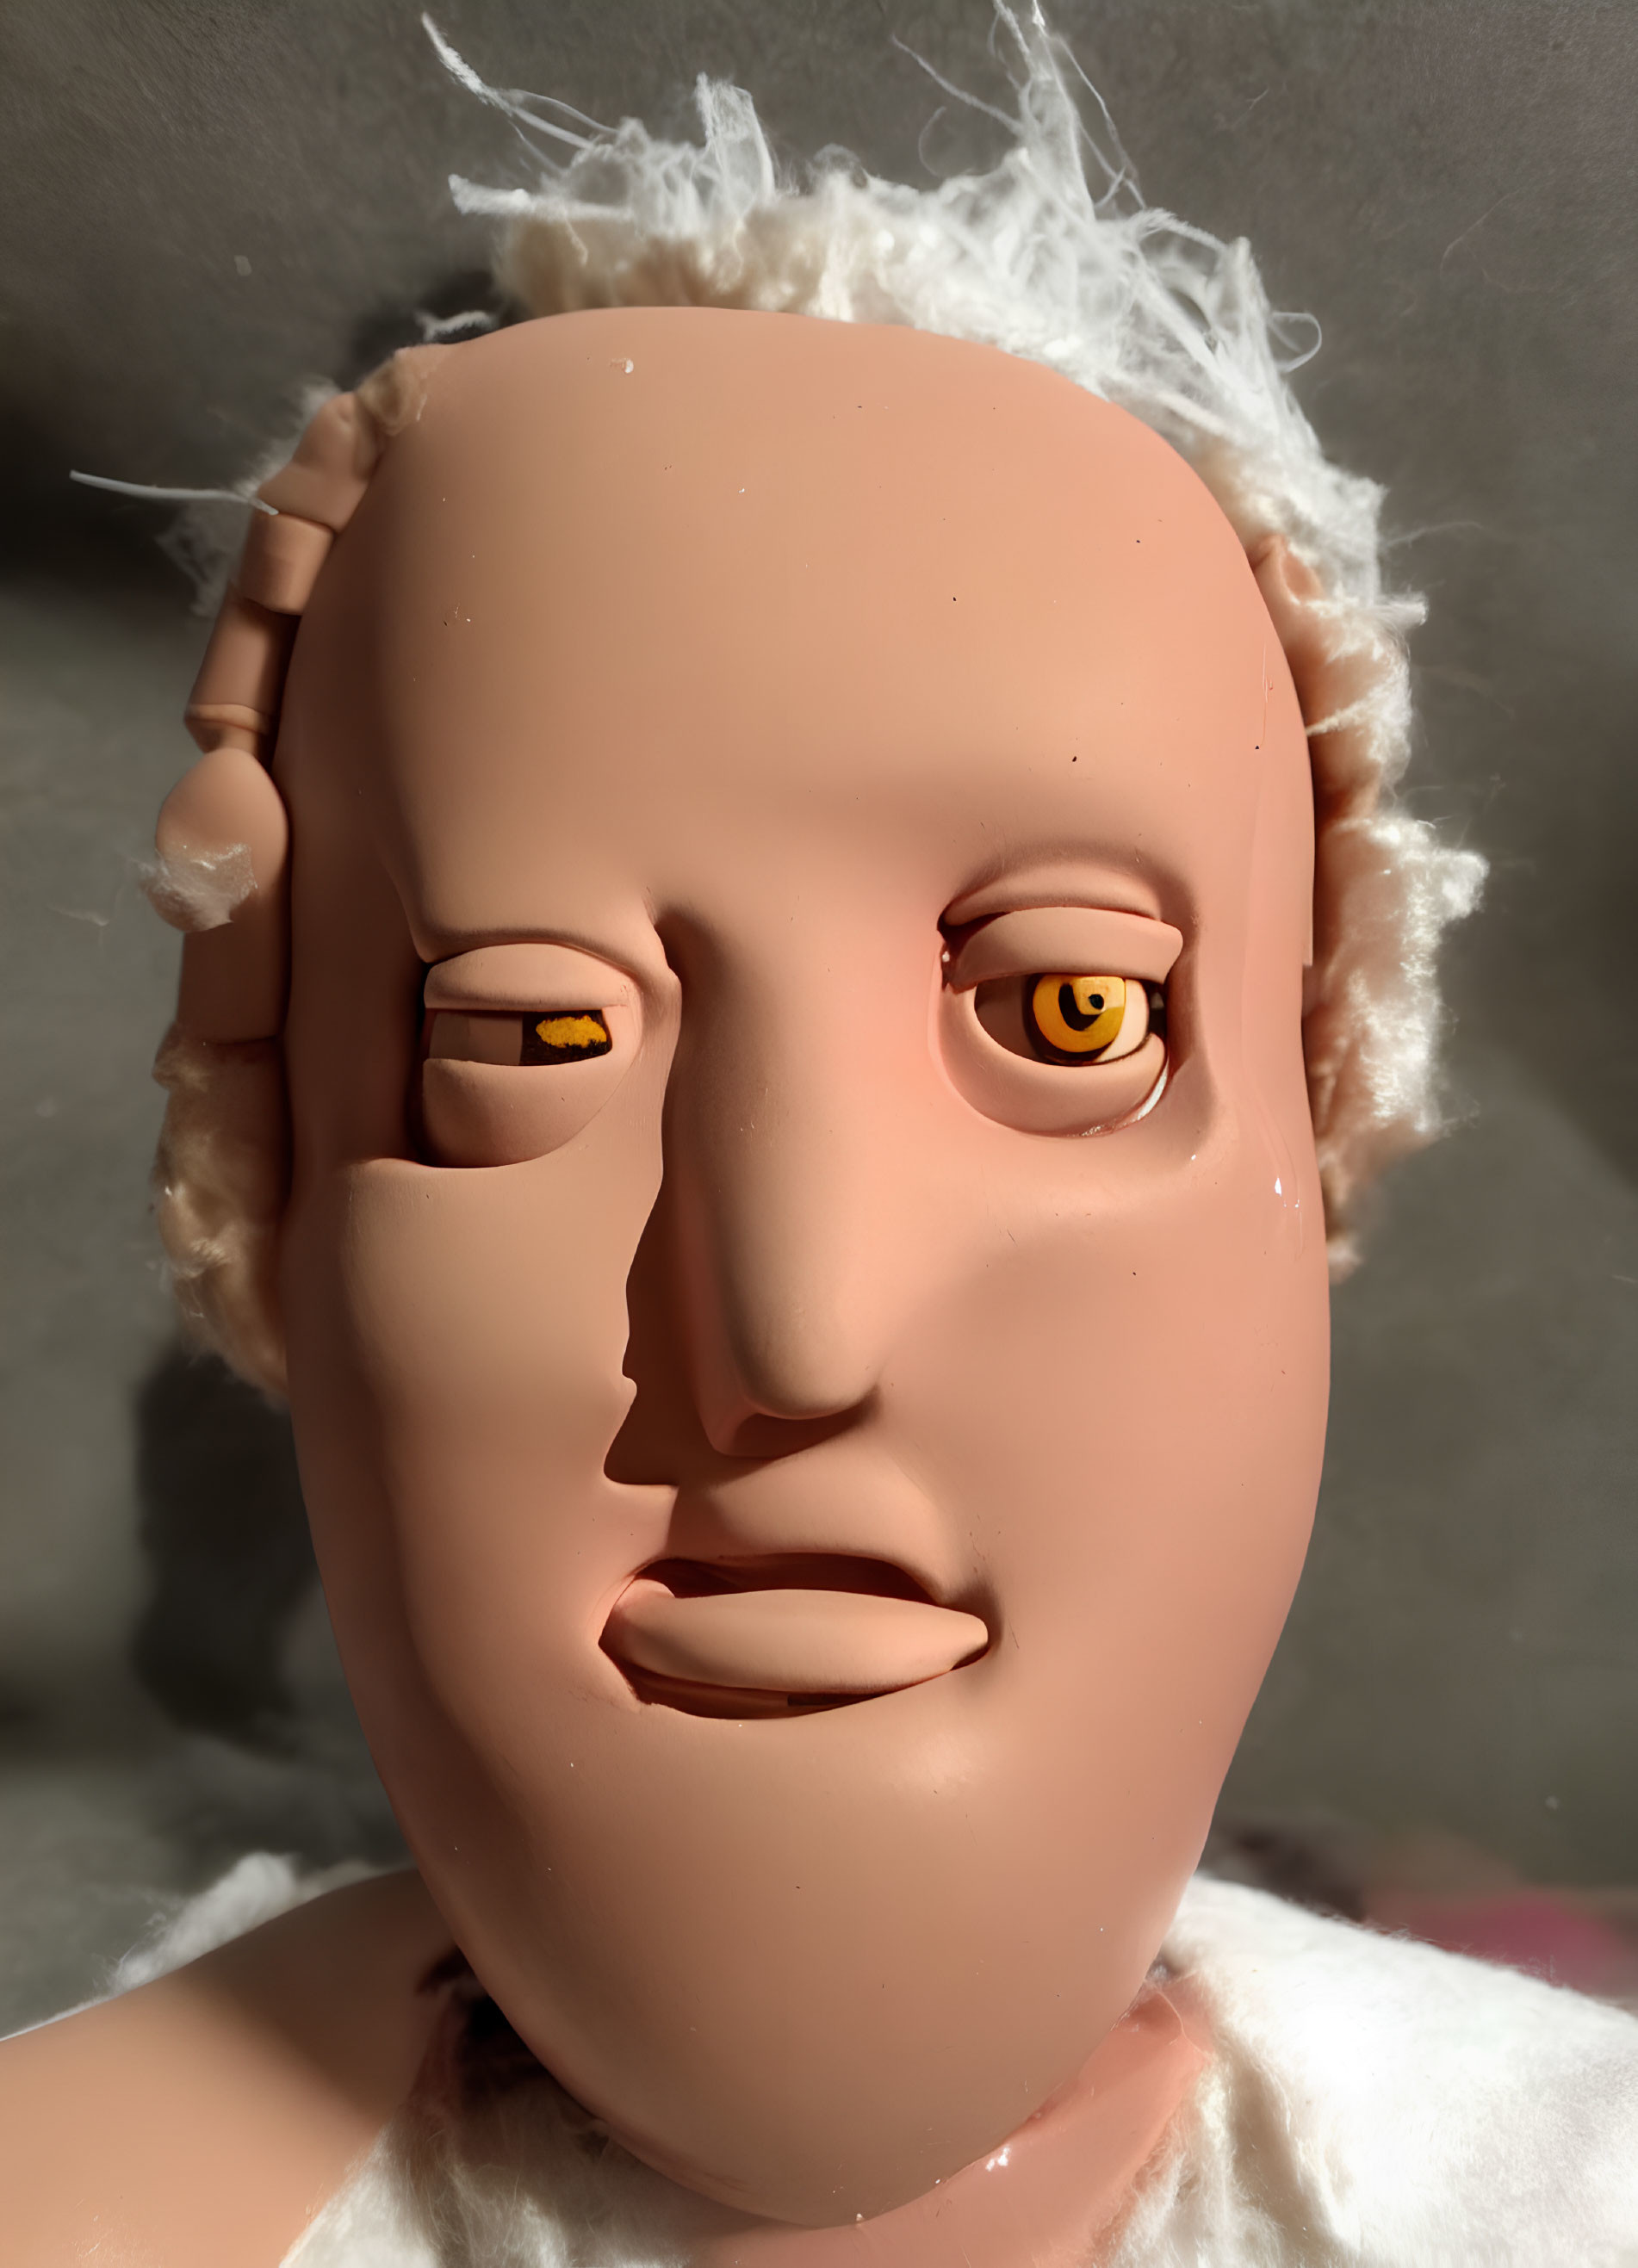 Detailed Close-Up of Doll's Head with Yellow Eyes and Mechanical Components